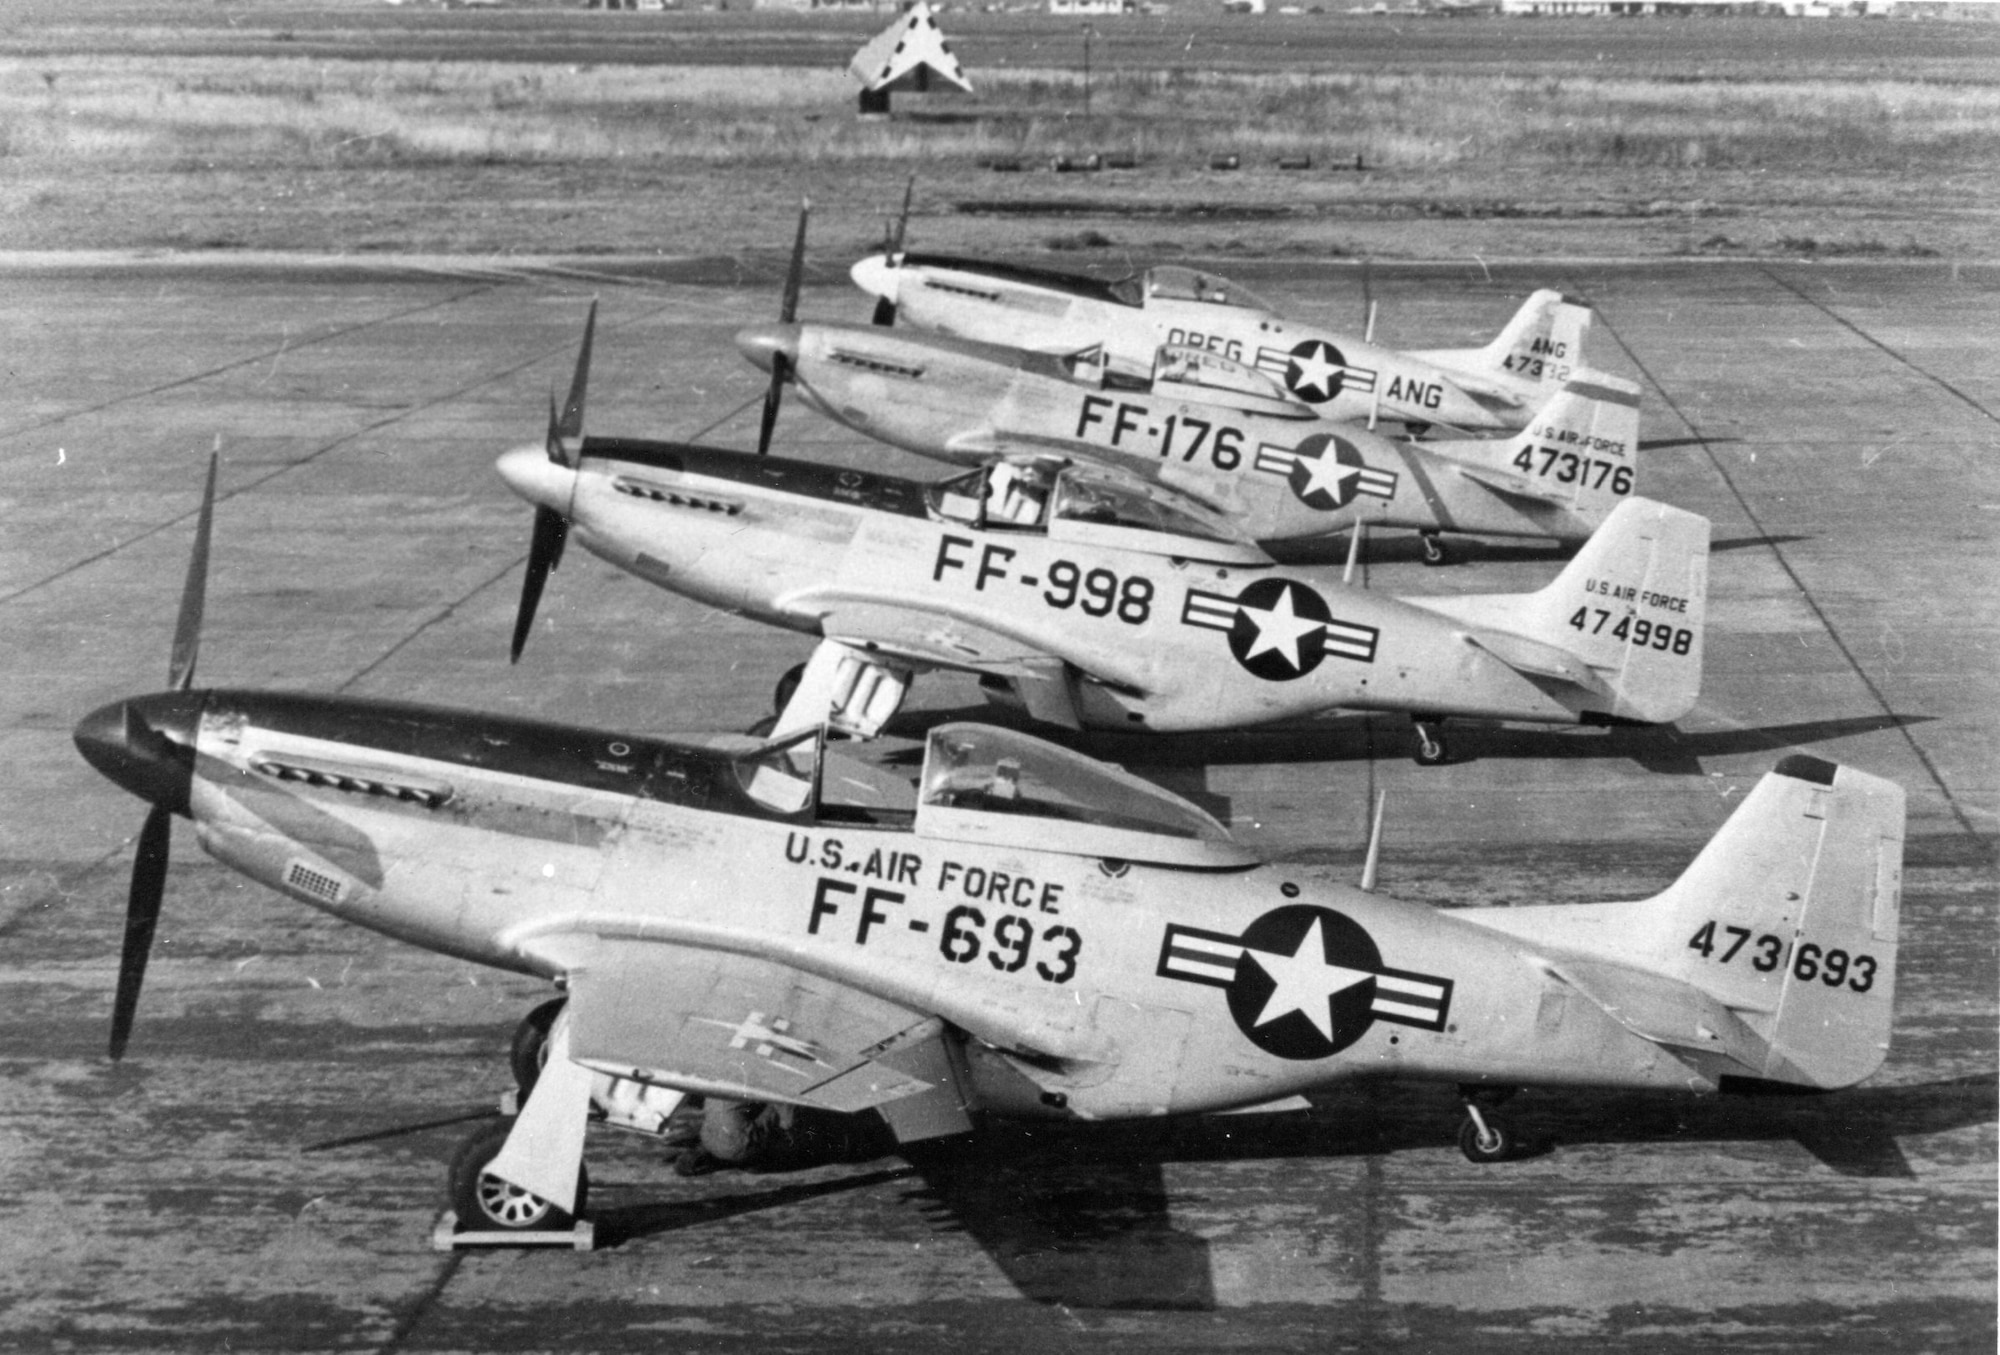 Three North American F-51D Mustang fighters rest beside an Oregon example of the type in this post-1948 view at Portland Air Base.  The trio of Mustangs could be either replacement aircraft for the OreANG or transients enroute to another destination.  The Mustang was the 142nd Fighter Group’s primary aircraft assigned after World War II and on into the Korean War era, found in squadron-level strength in the 123rd Fighter Squadron.  The group also had a small utility flight composed of other support aircraft types in small numbers.  The Caretaker role was essential to keeping all of the OreANG’s aircraft operational as well as handling transient aircraft. (Courtesy 142nd Fighter Wing History Archives)